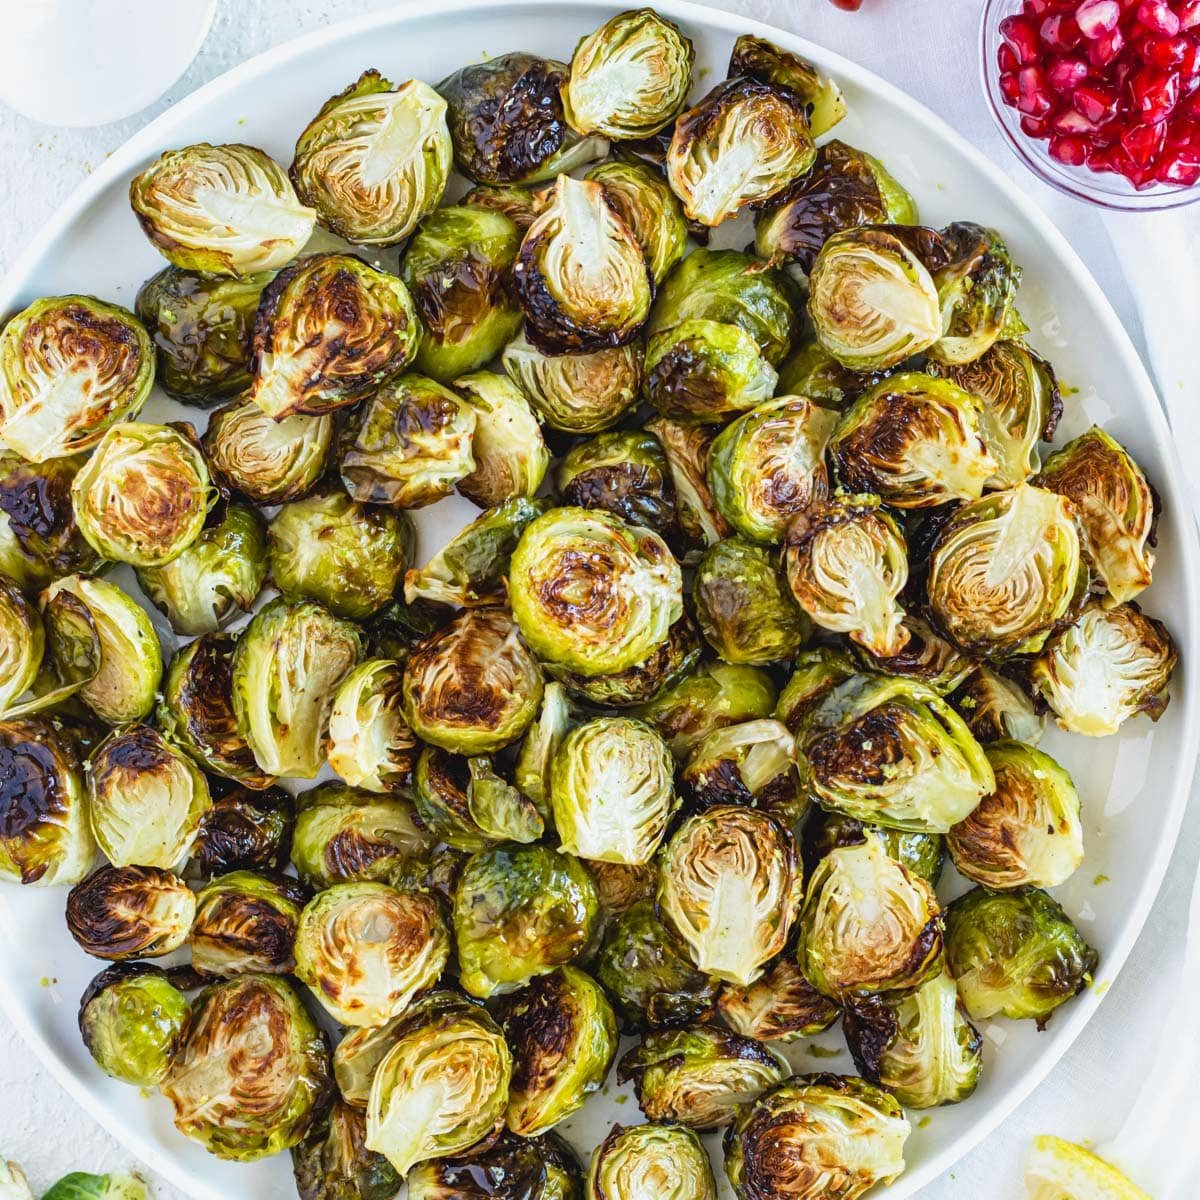 Roasted Brussels sprout recipe with honey mustard dressing